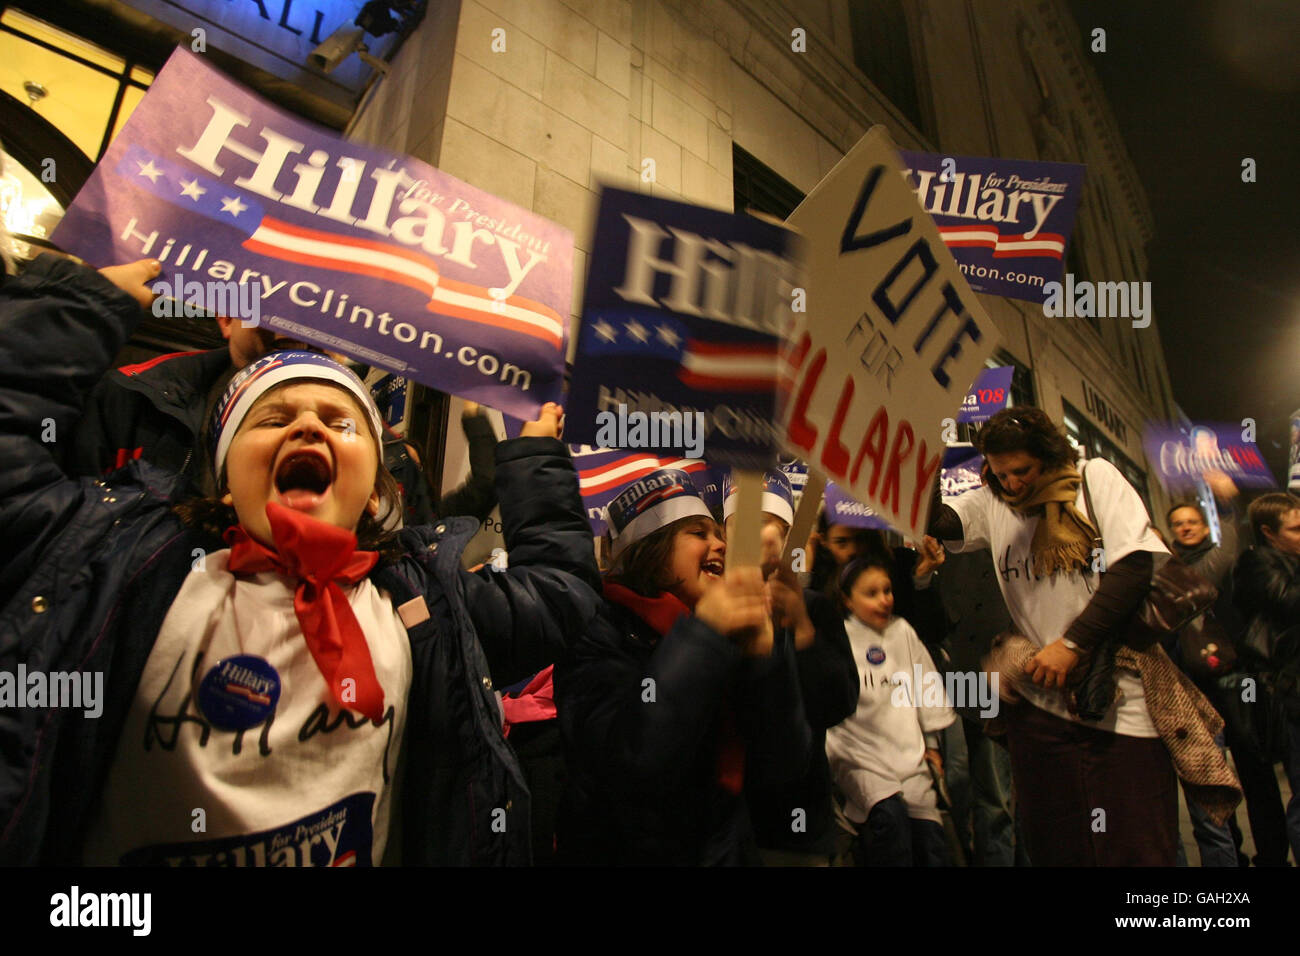 Supporters of Hillary Clinton voice their opinions outside Porchester Hall in west London, where Americans were voting on their future Democratic Party leader. Stock Photo